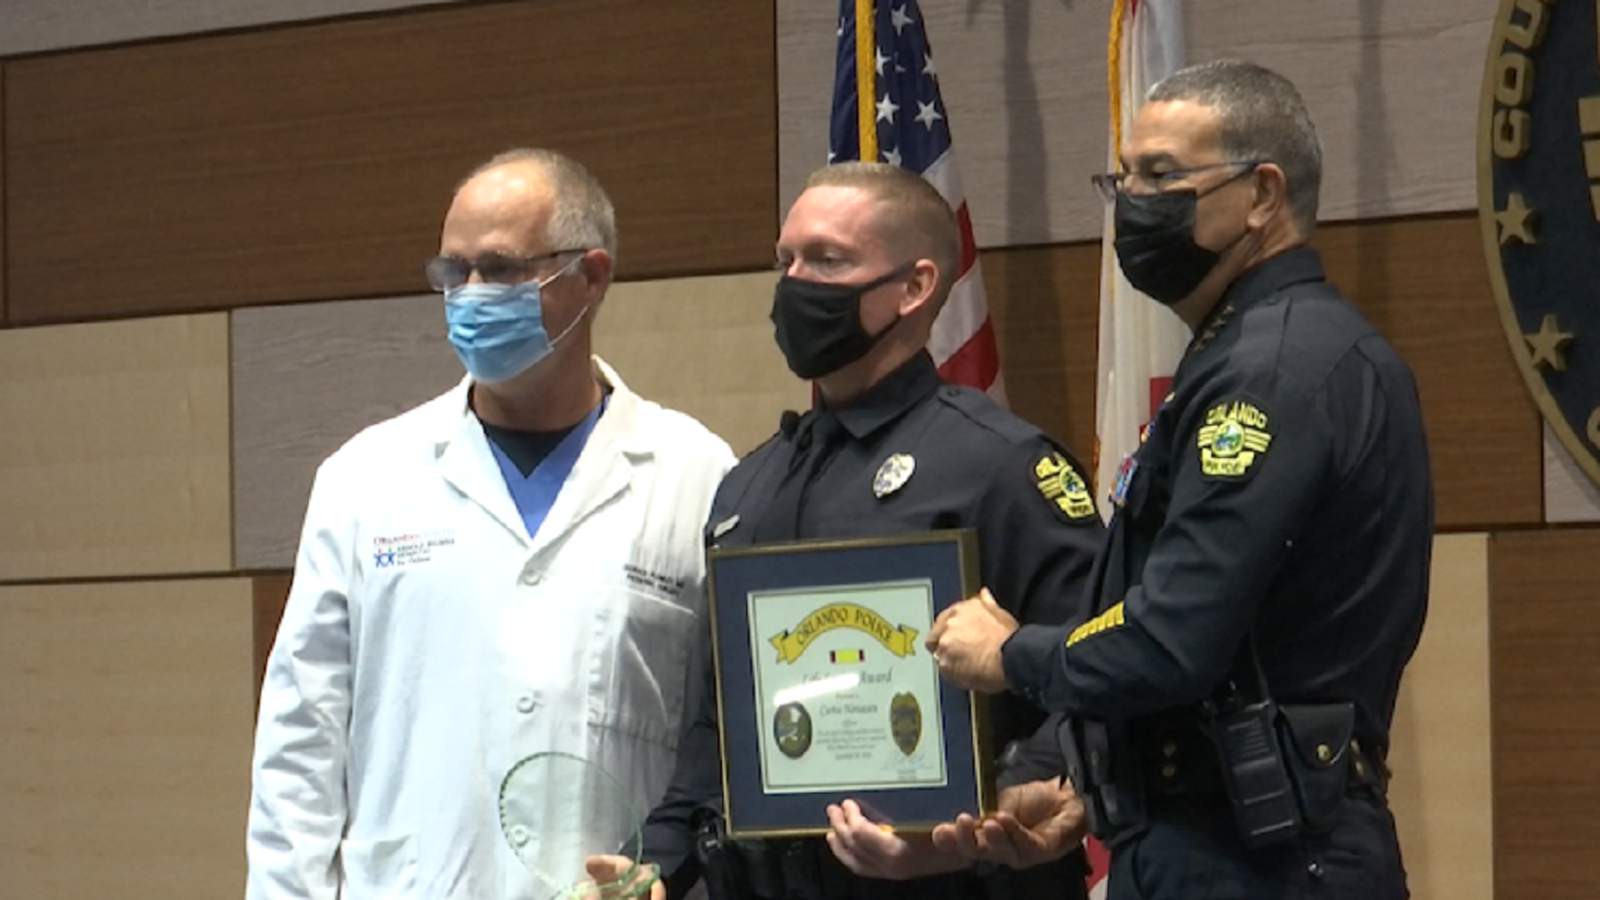 ‘Right place, right time:’ Orlando officer honored for saving toddler’s life